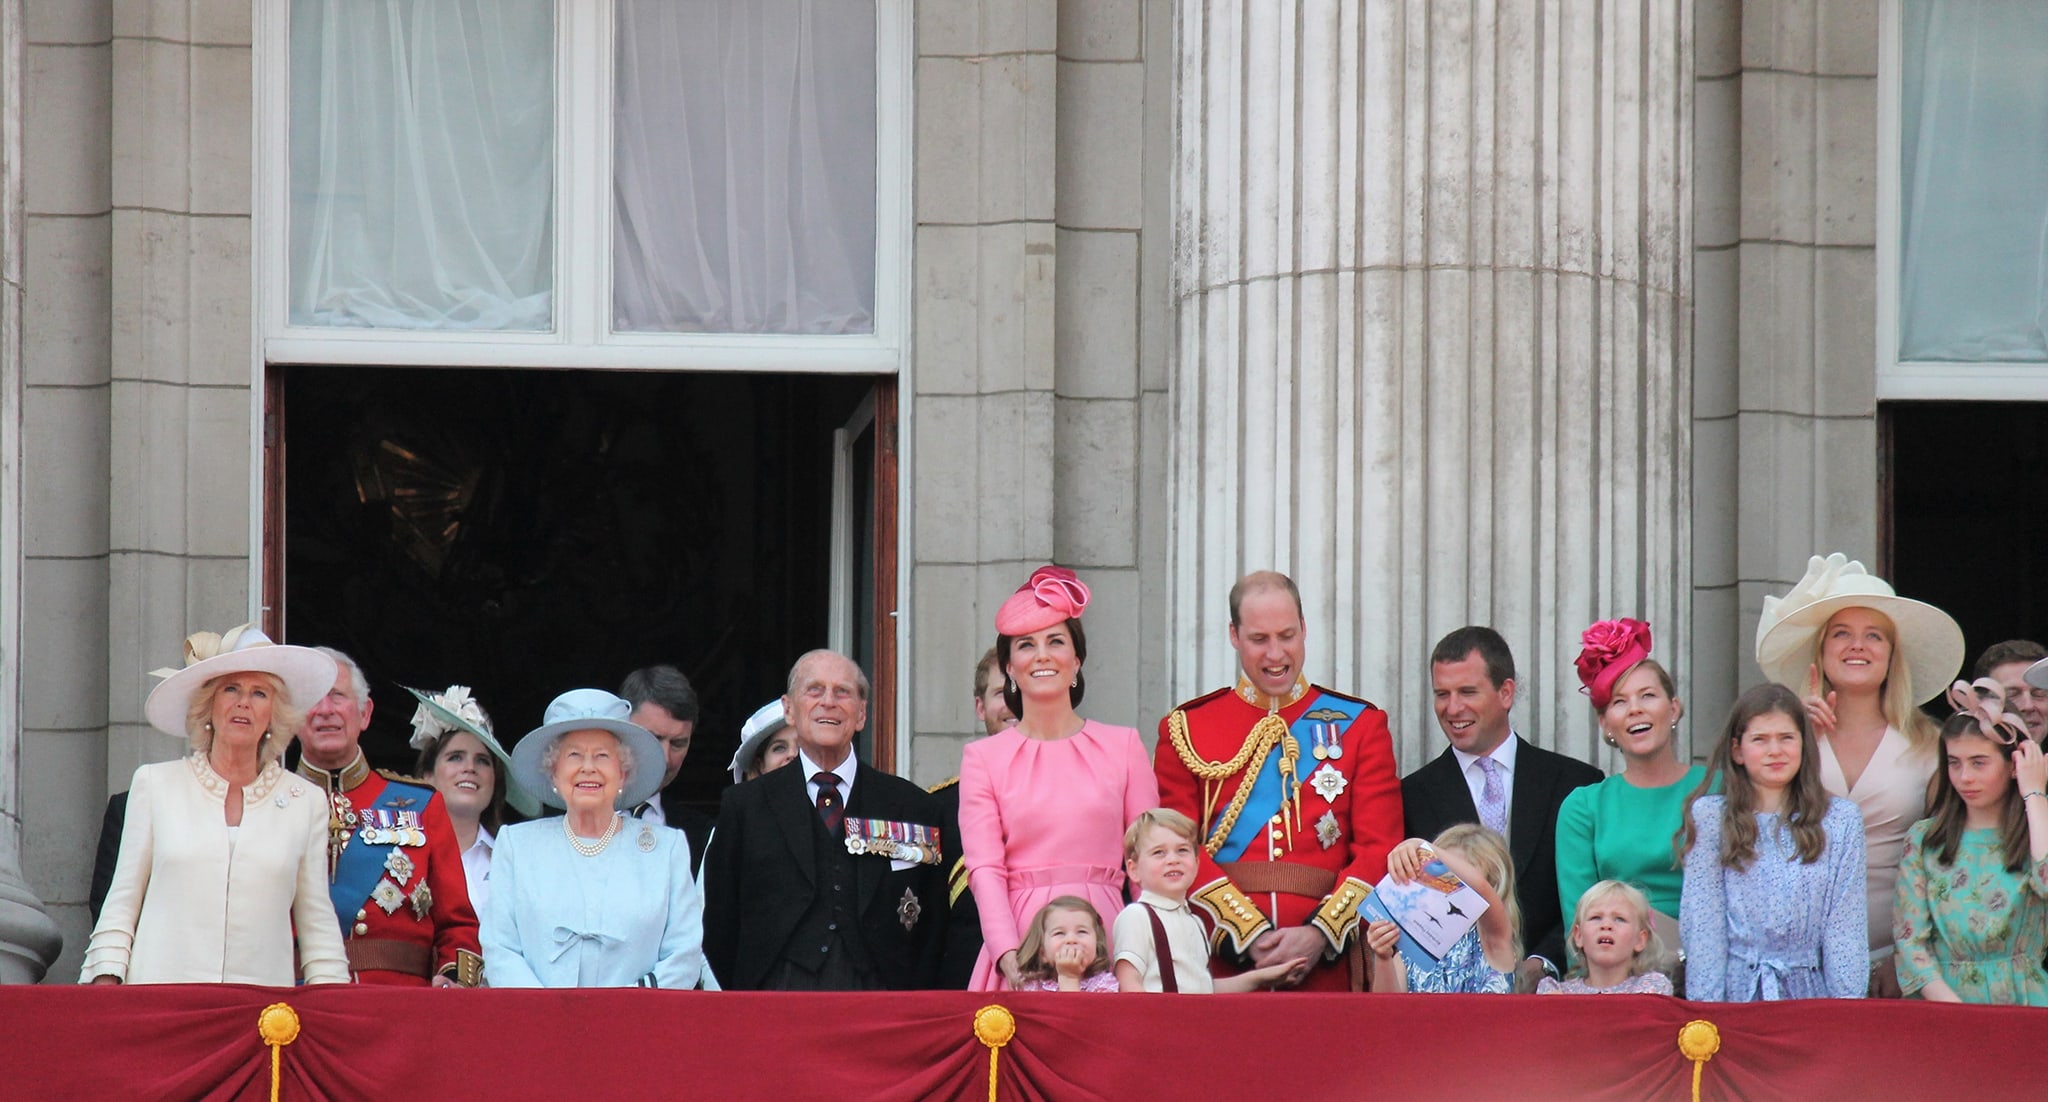 The British Royal Family celebrating the Queen's Official Birthday by attending the annual Trooping the Colour ceremony at the Buckingham Palace, London June 17, 2017